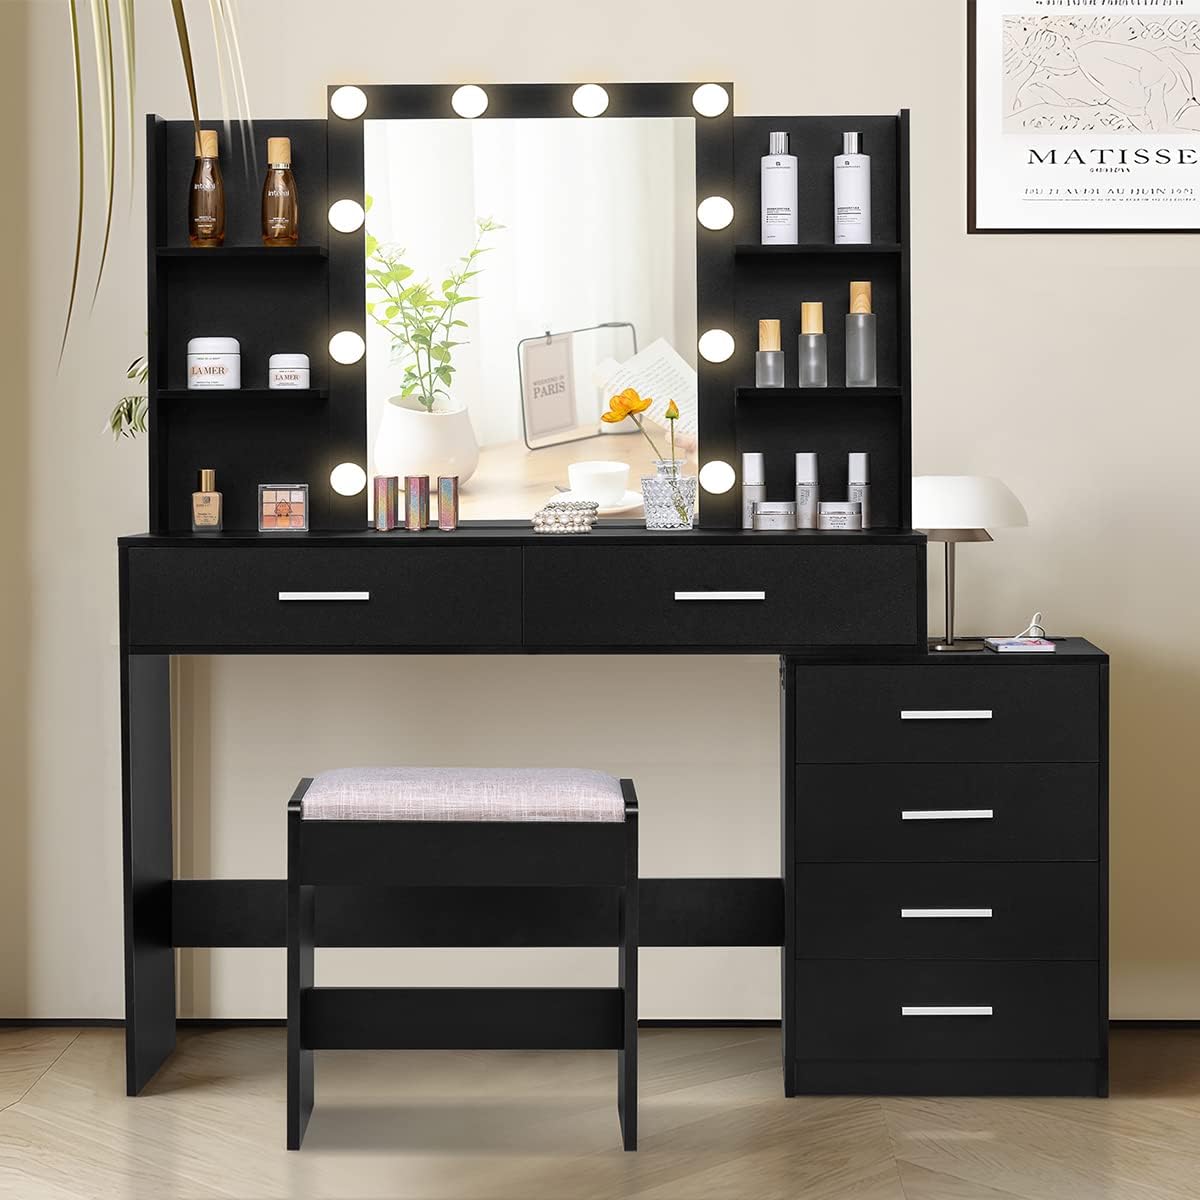 Comparing 5 Makeup Vanity Desks: Features, Drawers, and Lighting